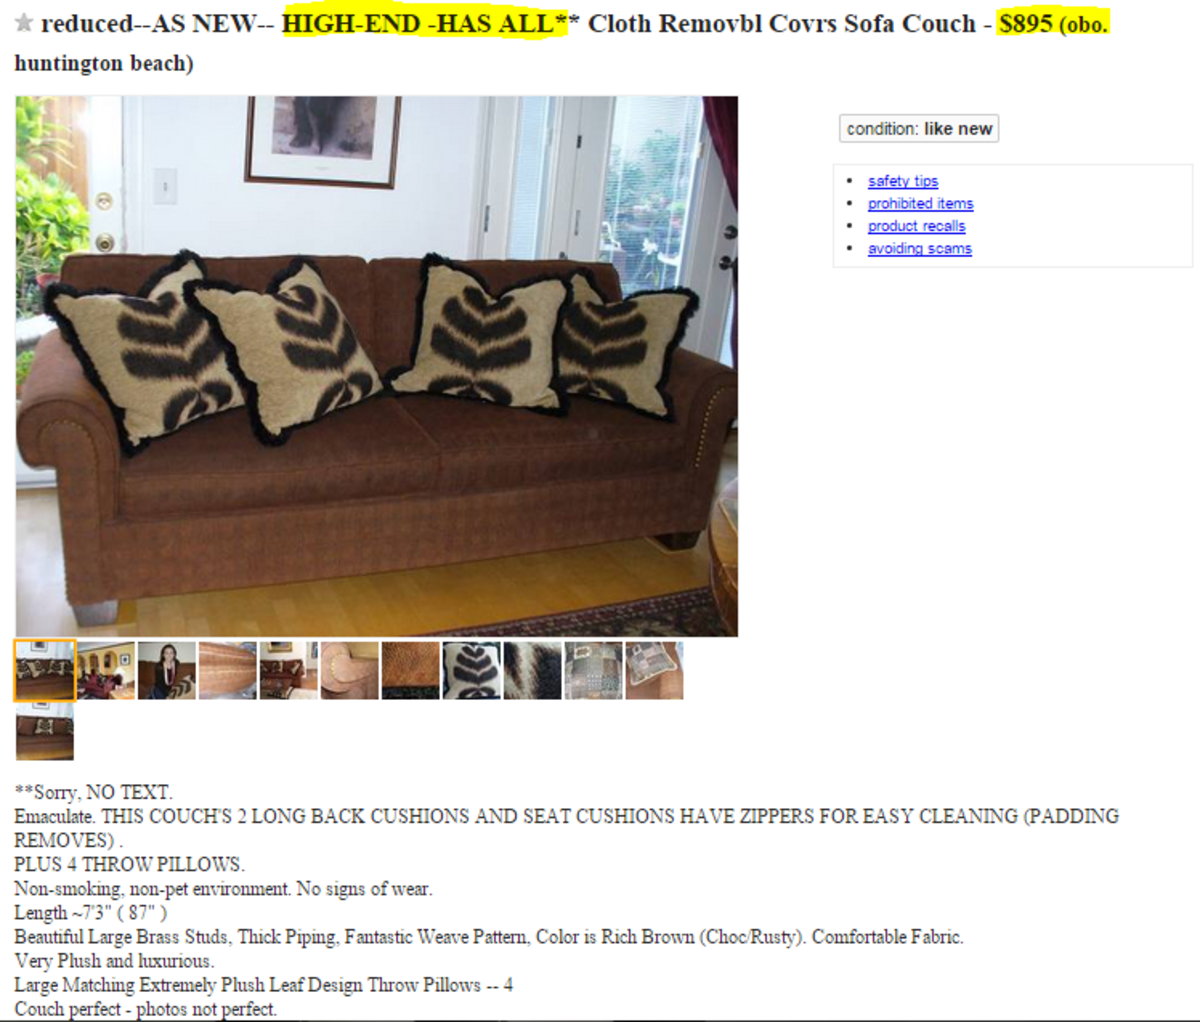 Don't bother with ones like this. This person probably paid thousands of dollars for their couch and thinks $895 is a steal.  This couch is worth about $175 on the used market.